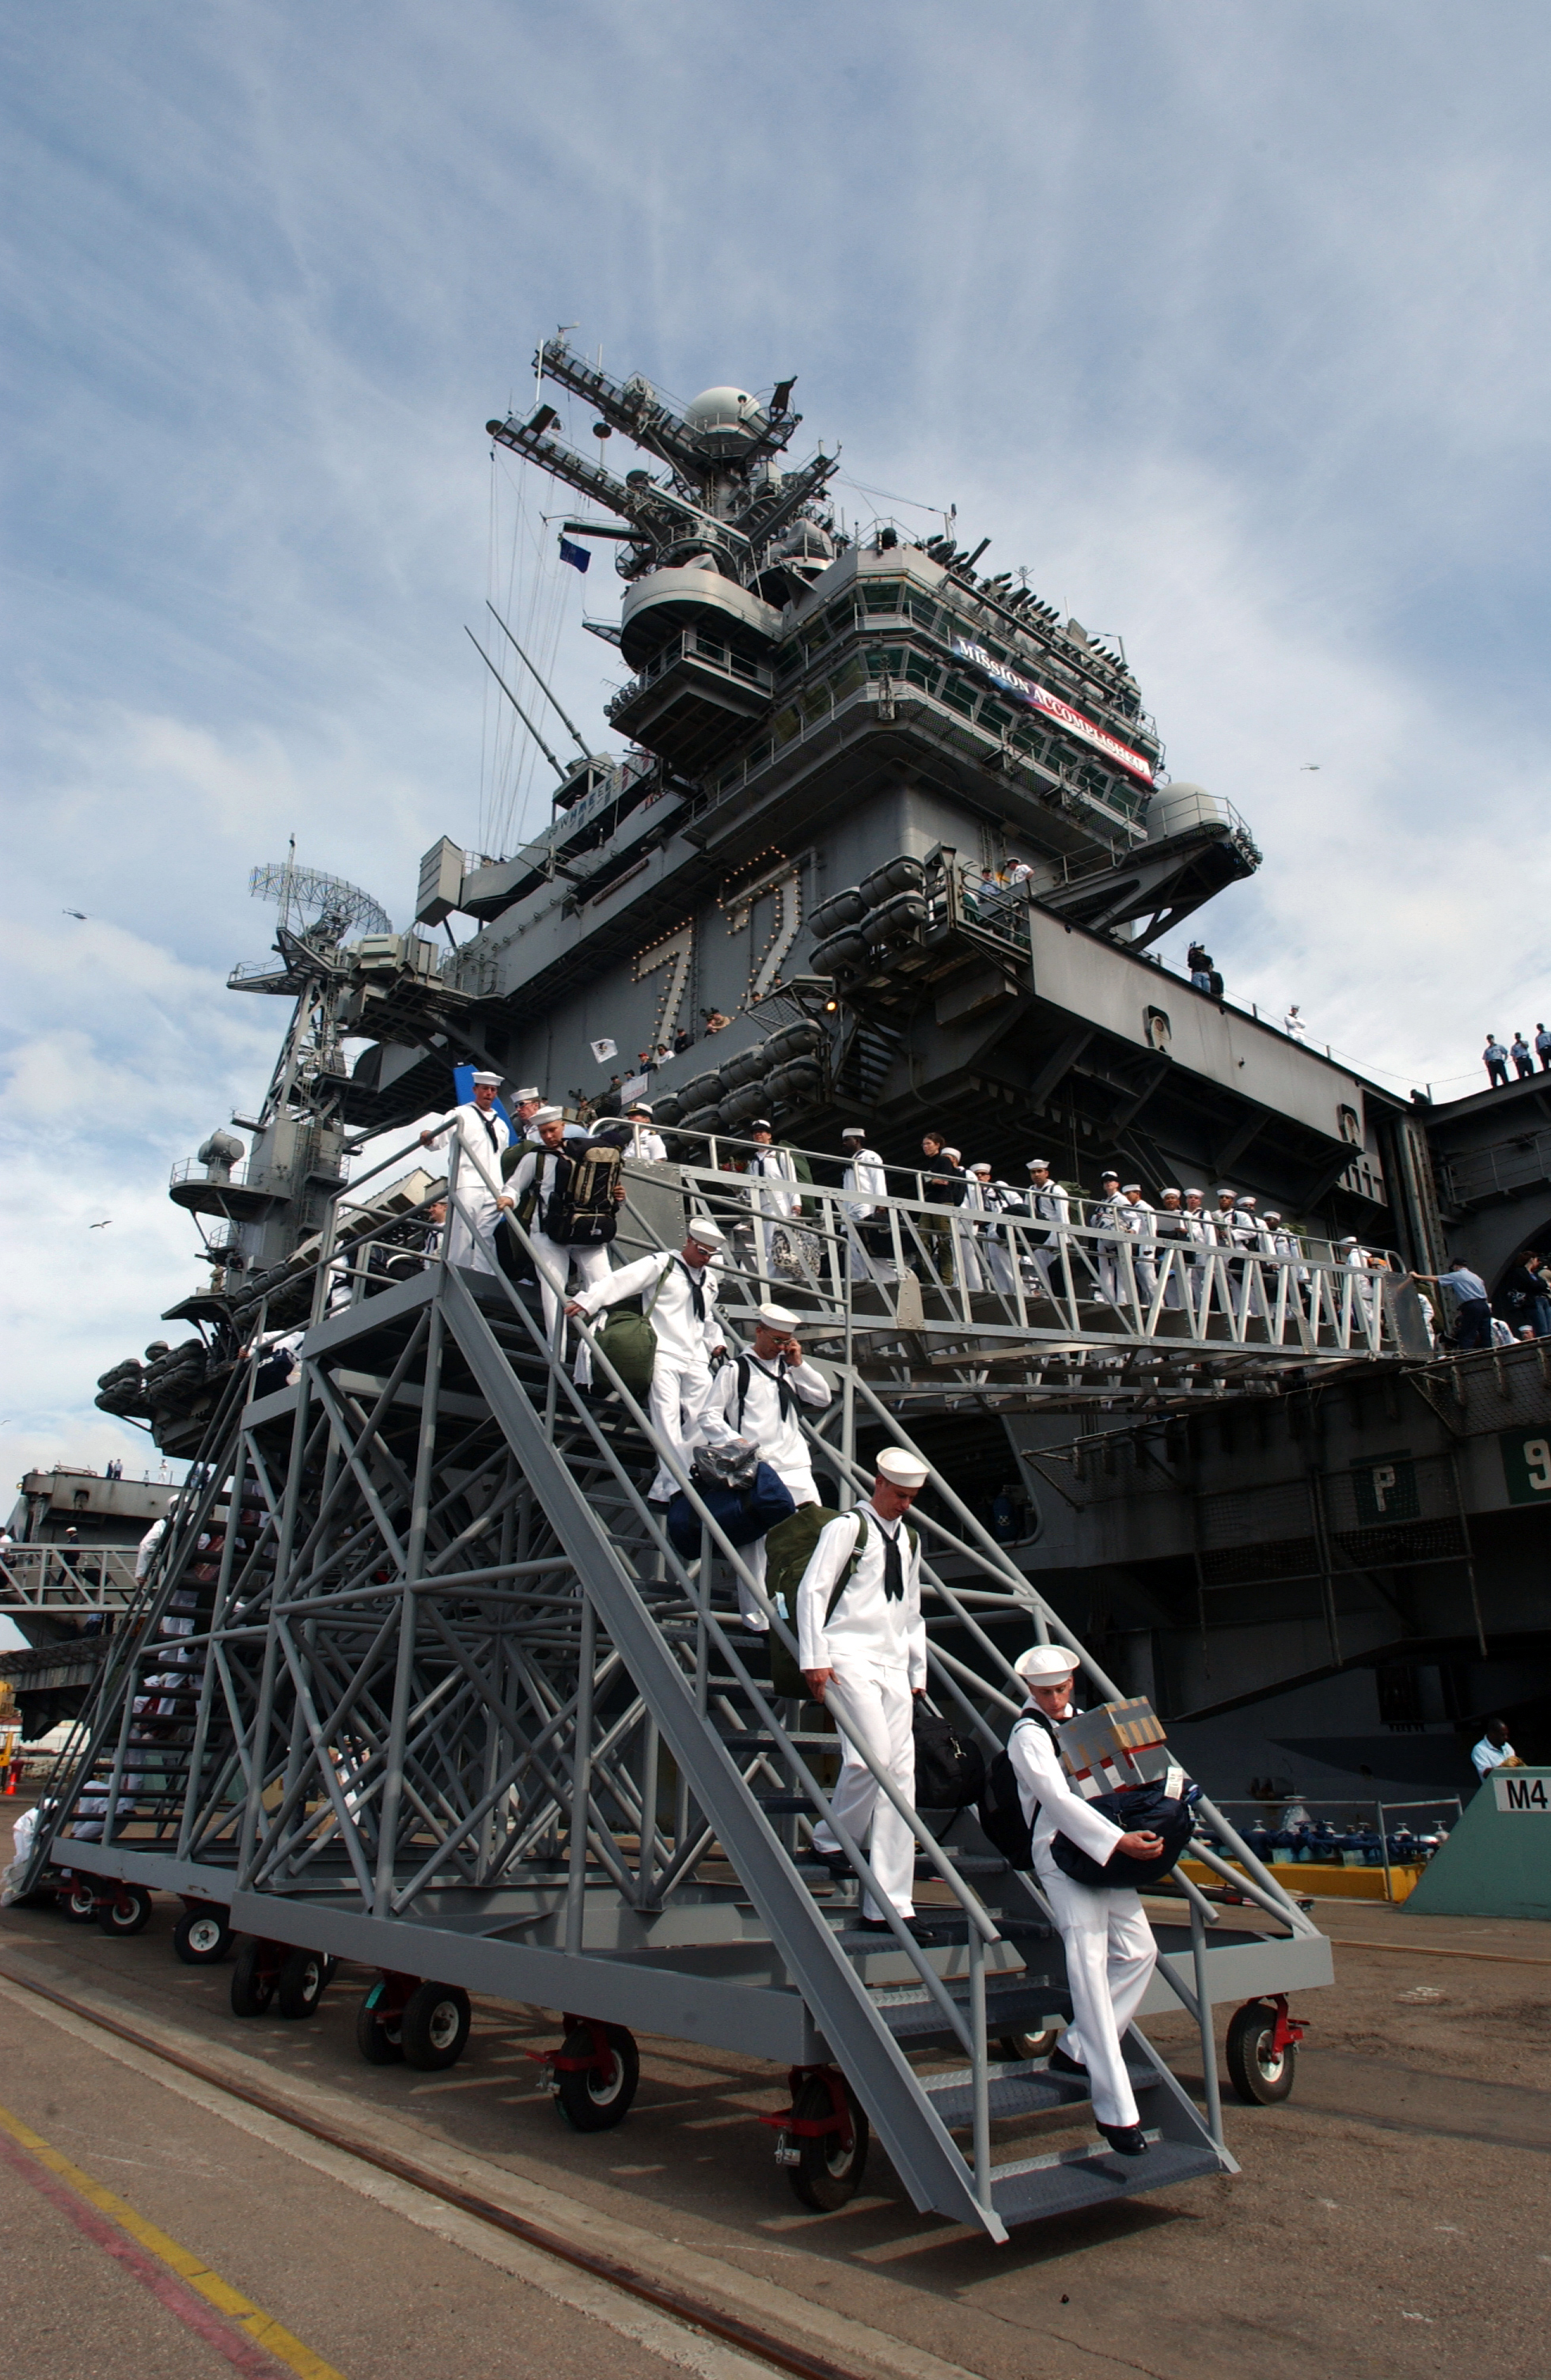 US Navy 030502-N-3236B-008 Sailors assigned to USS Abraham Lincoln (CVN 72) disembark upon the ship^rsquo,s arrival at NAS North Island